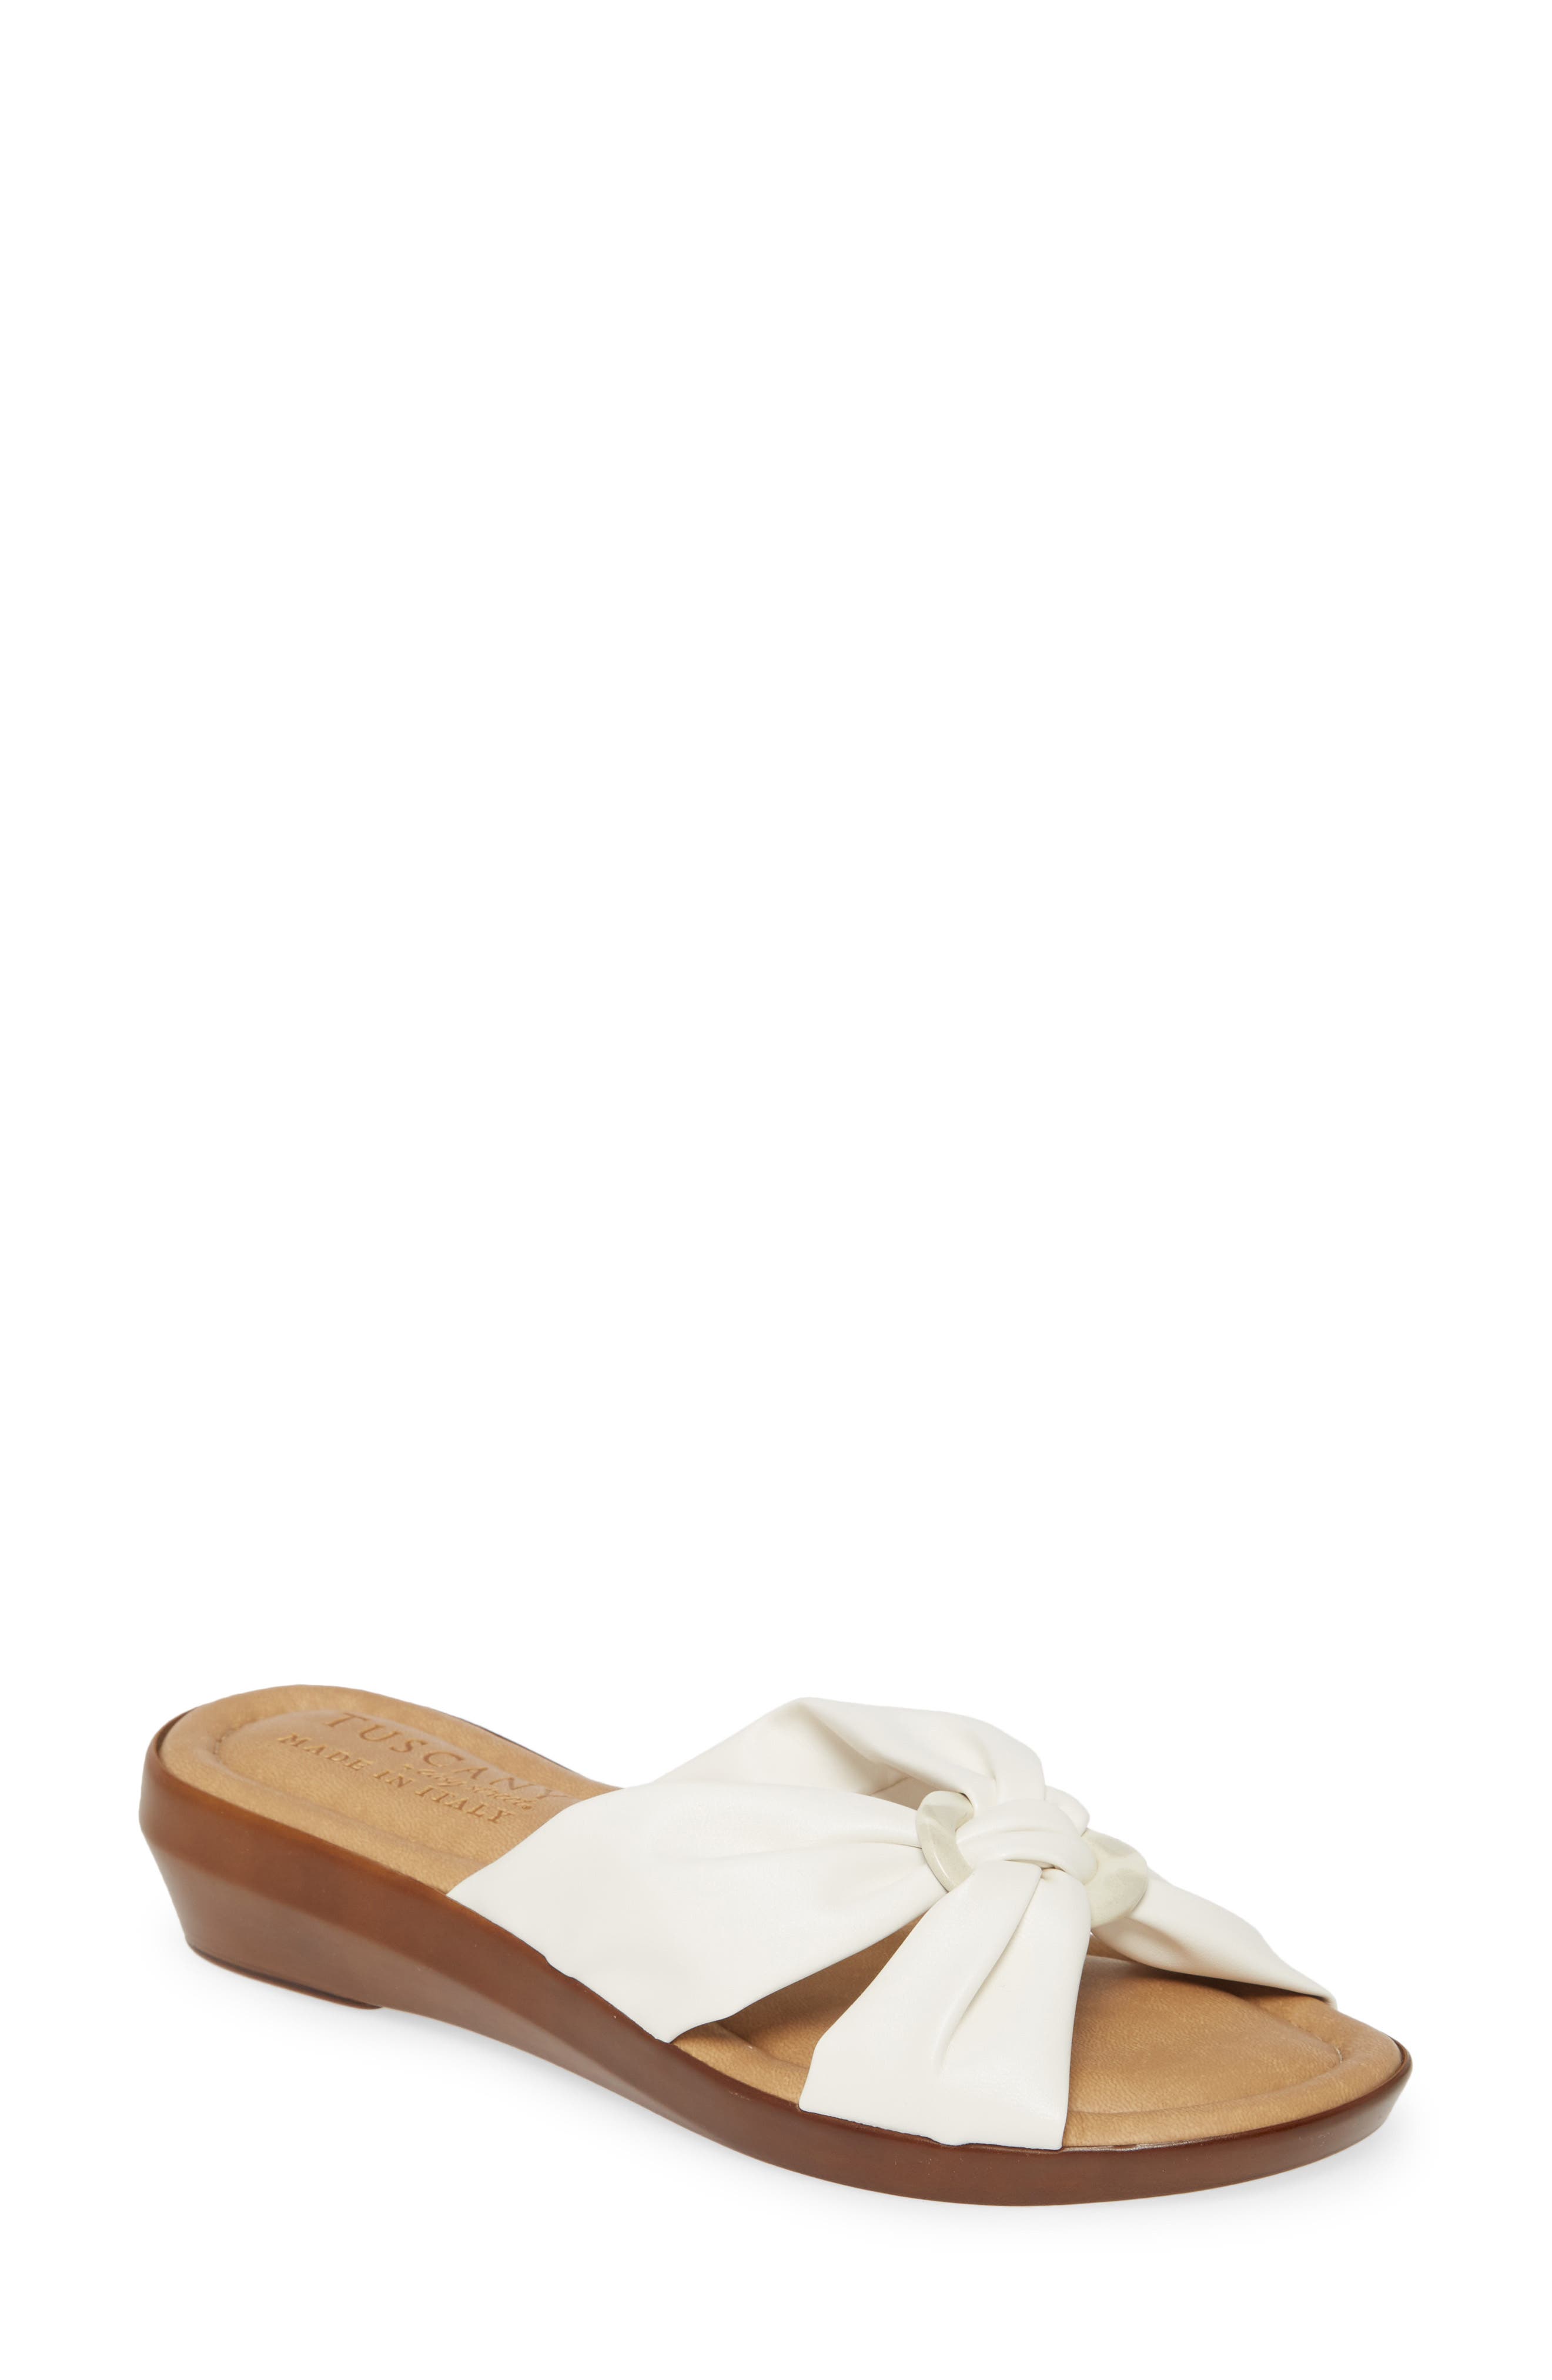 Narrow Width Shoes | Nordstrom